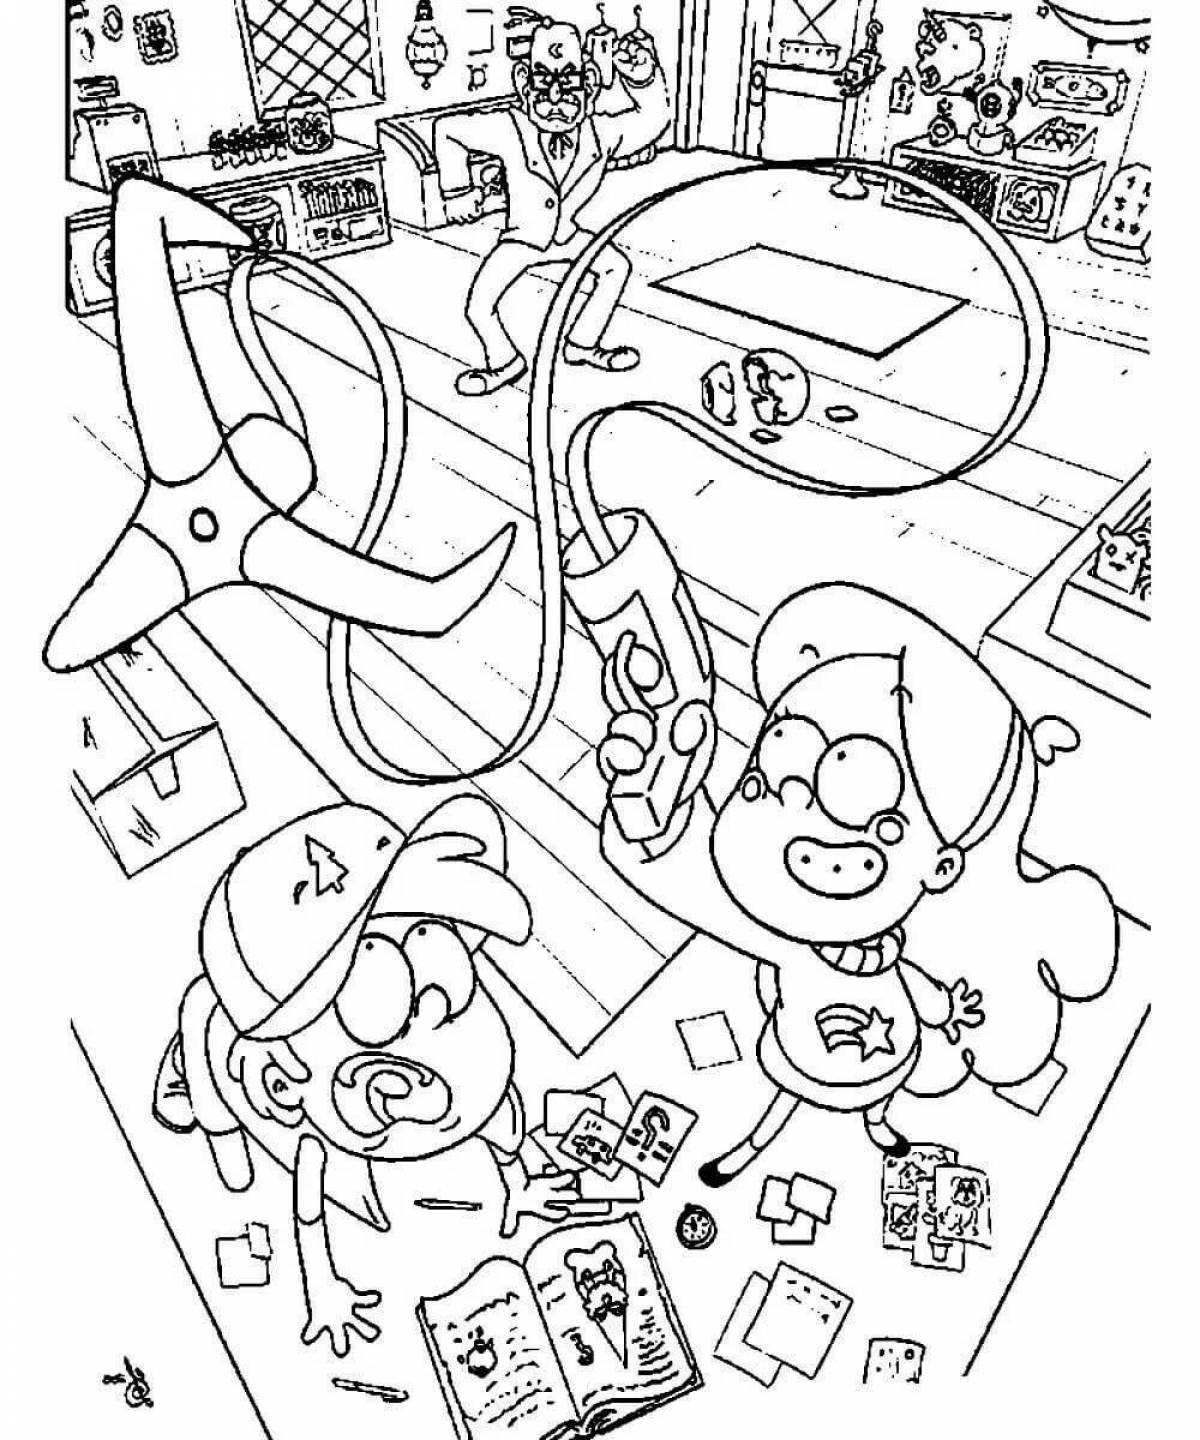 Coloring page of a cheerful couple